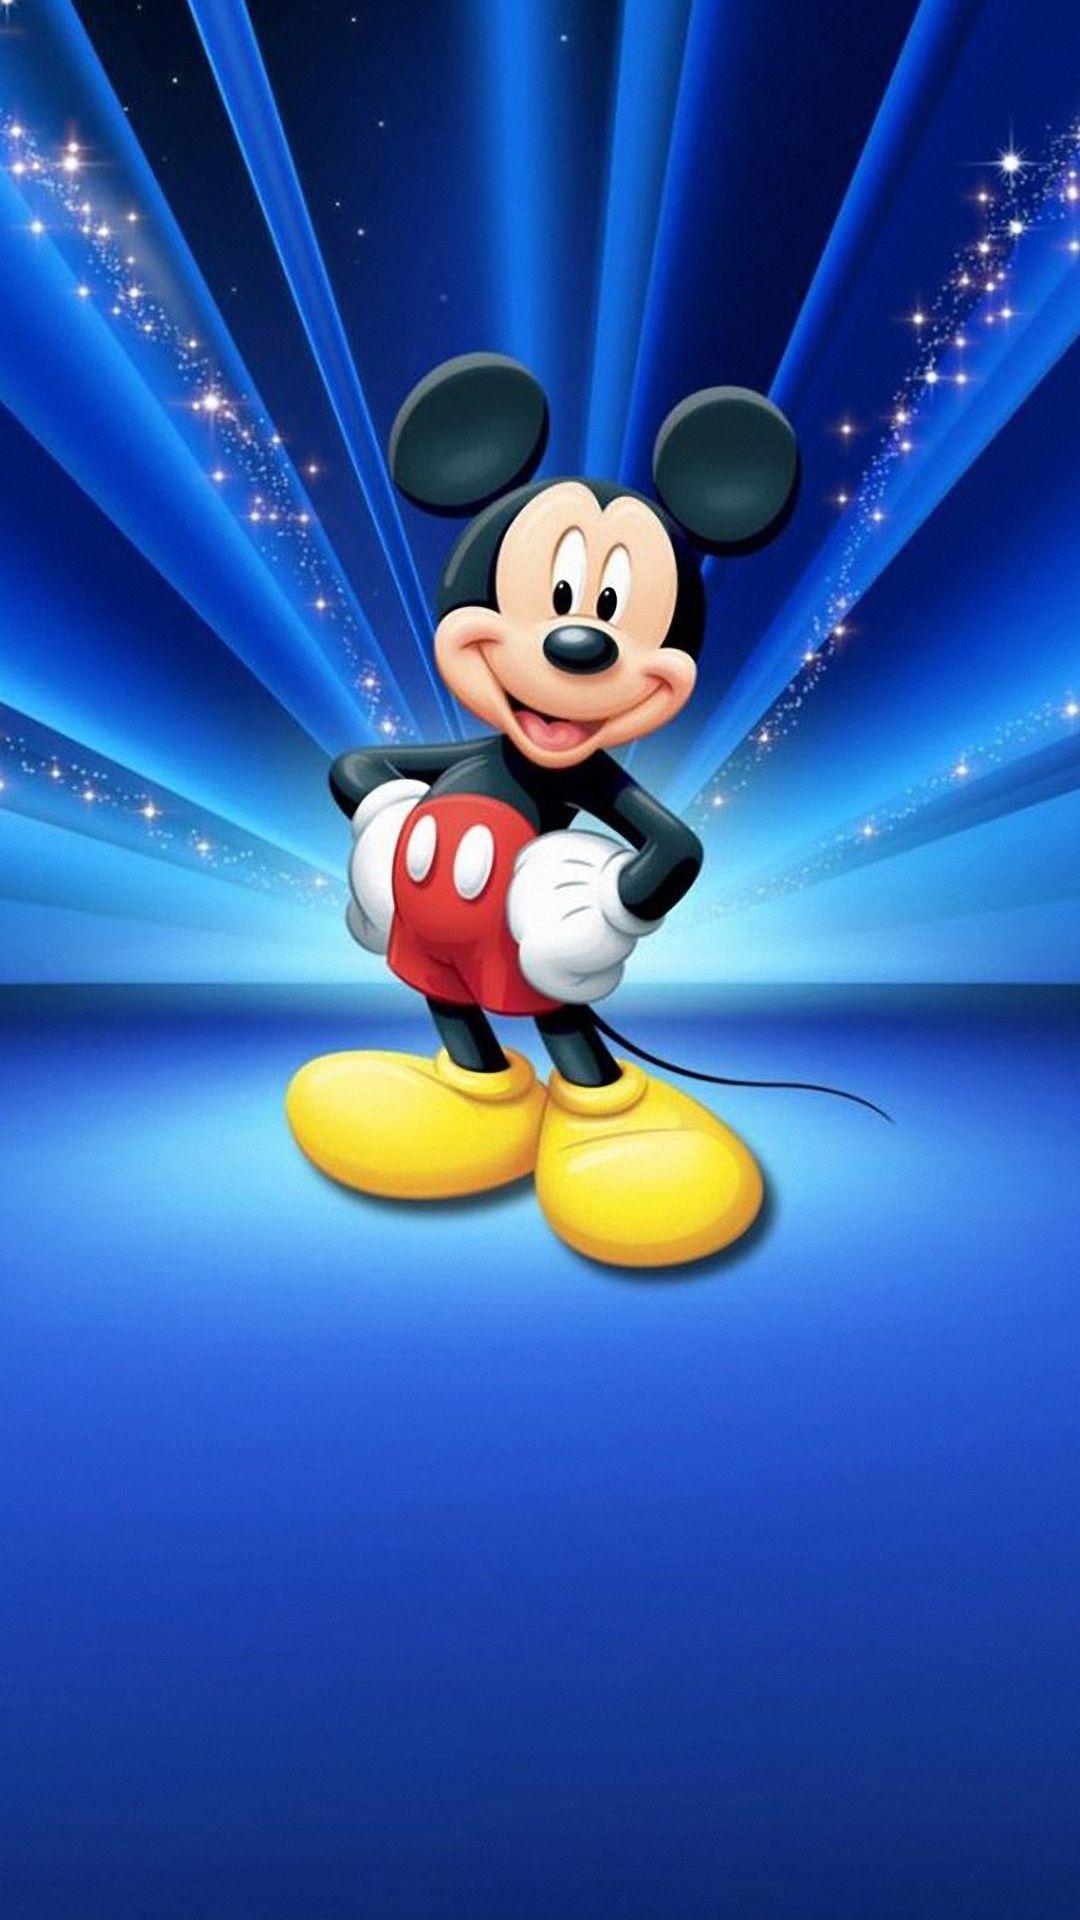 Mickey Mouse Wallpaper Hd Hd Picture Image